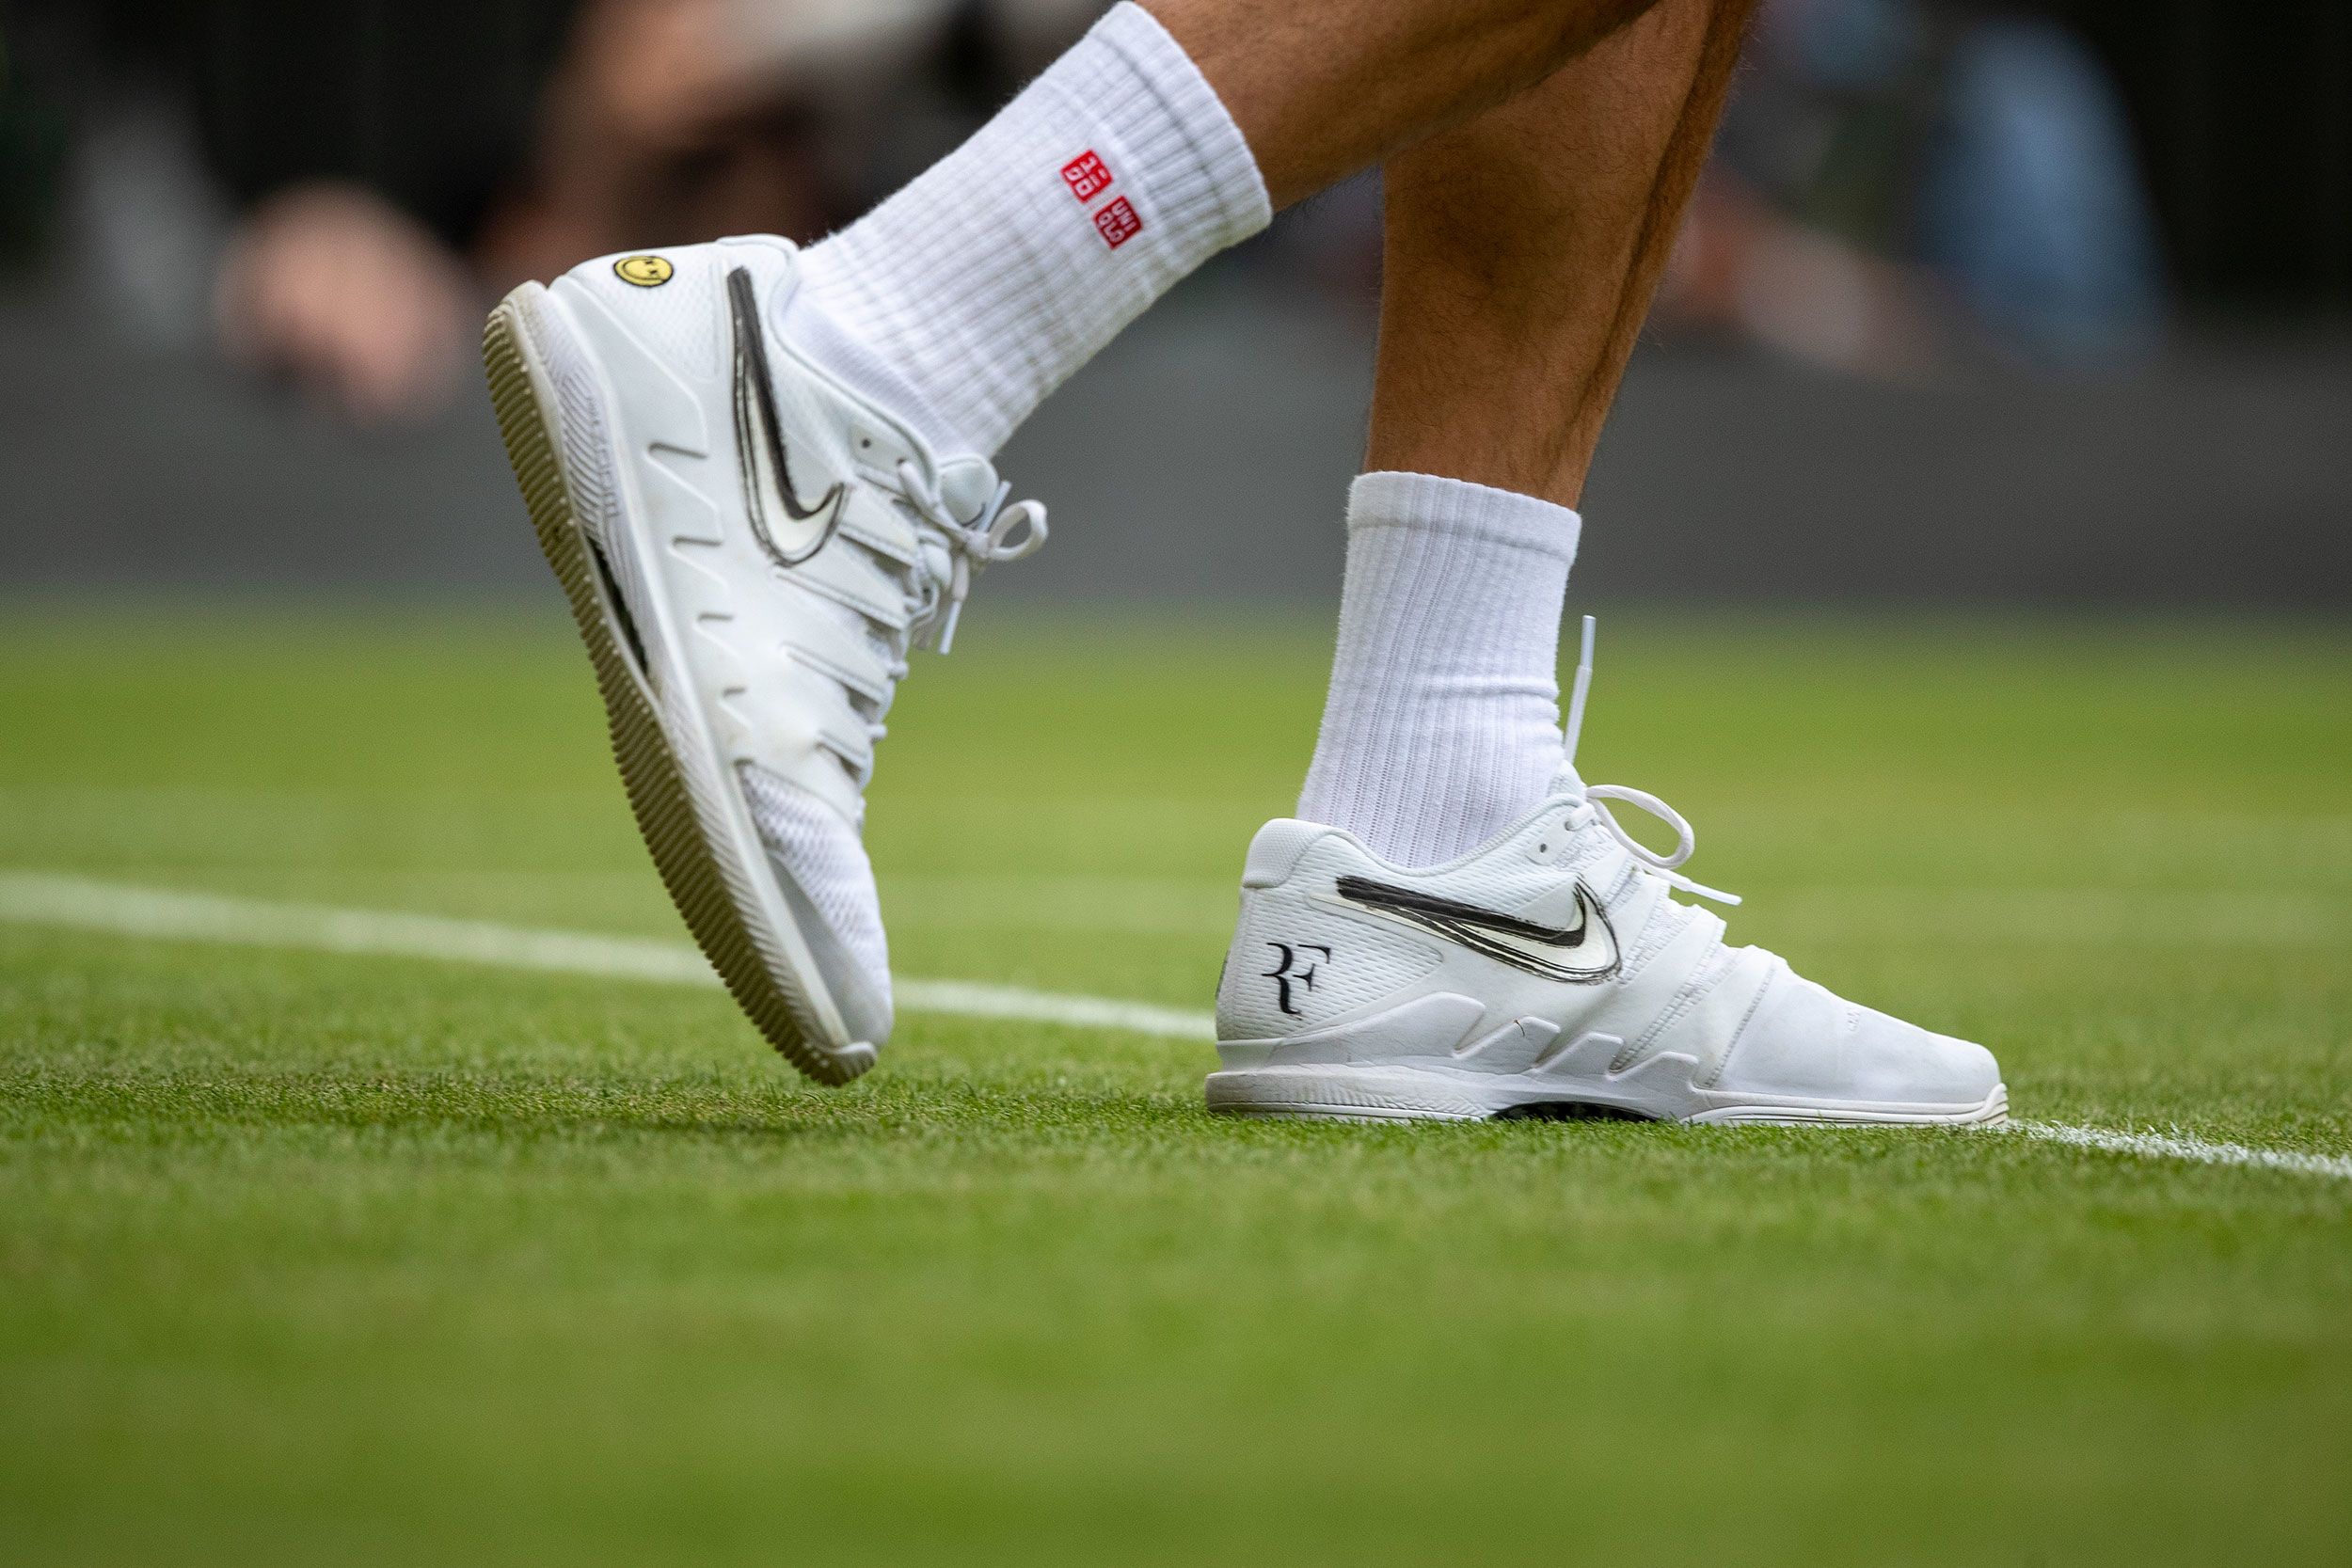 Roger Federer: Letting star leave Nike for Uniqlo was an 'atrocity,' says former tennis director